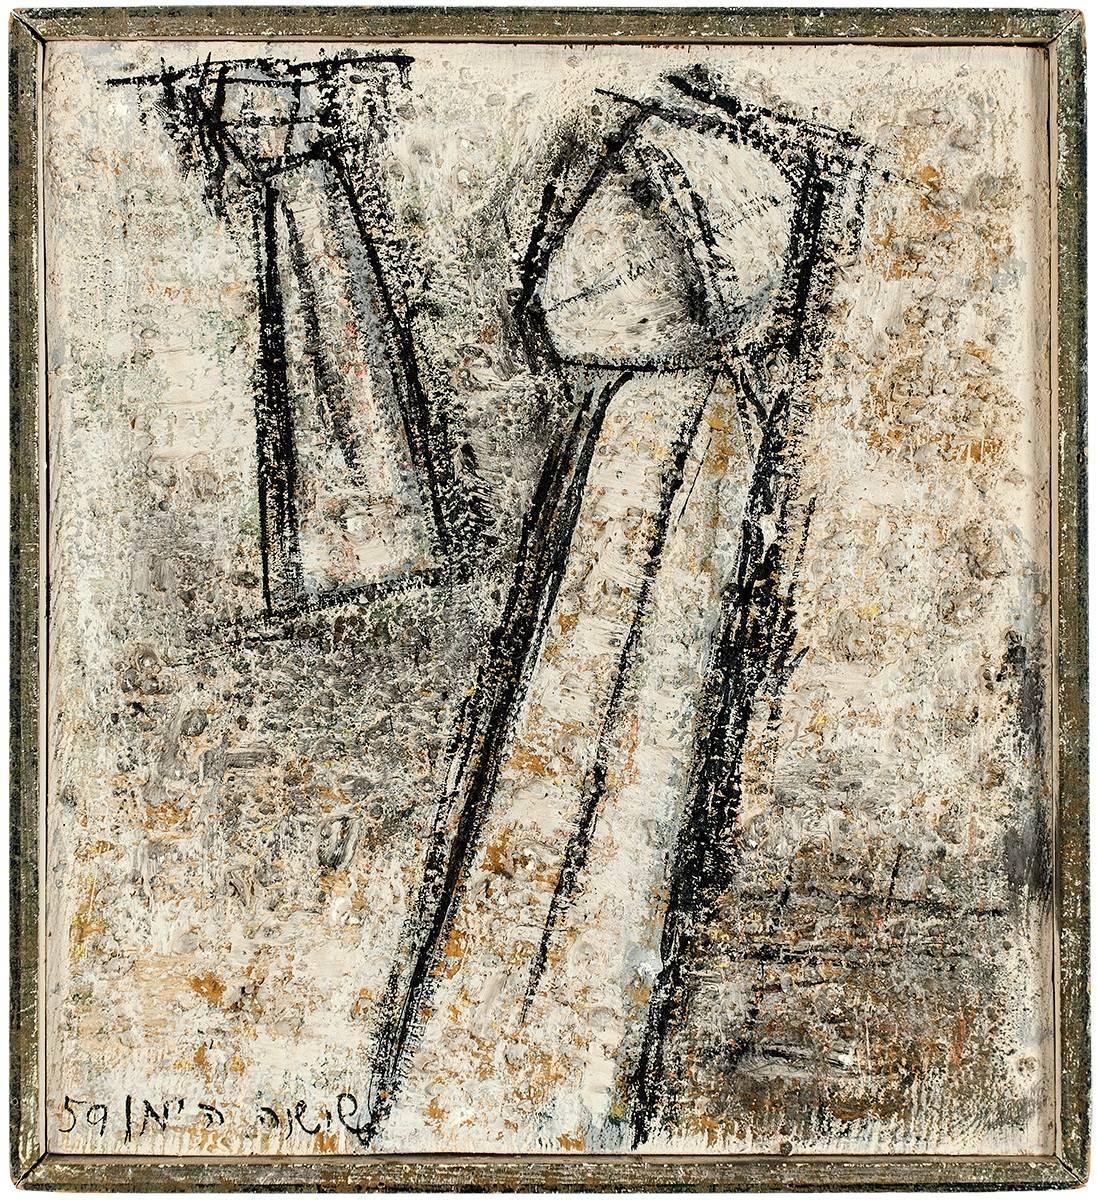 UNTITLED FIGURES (LINES AND SHAPES AGAINST TEXTURAL BACKGROUND)